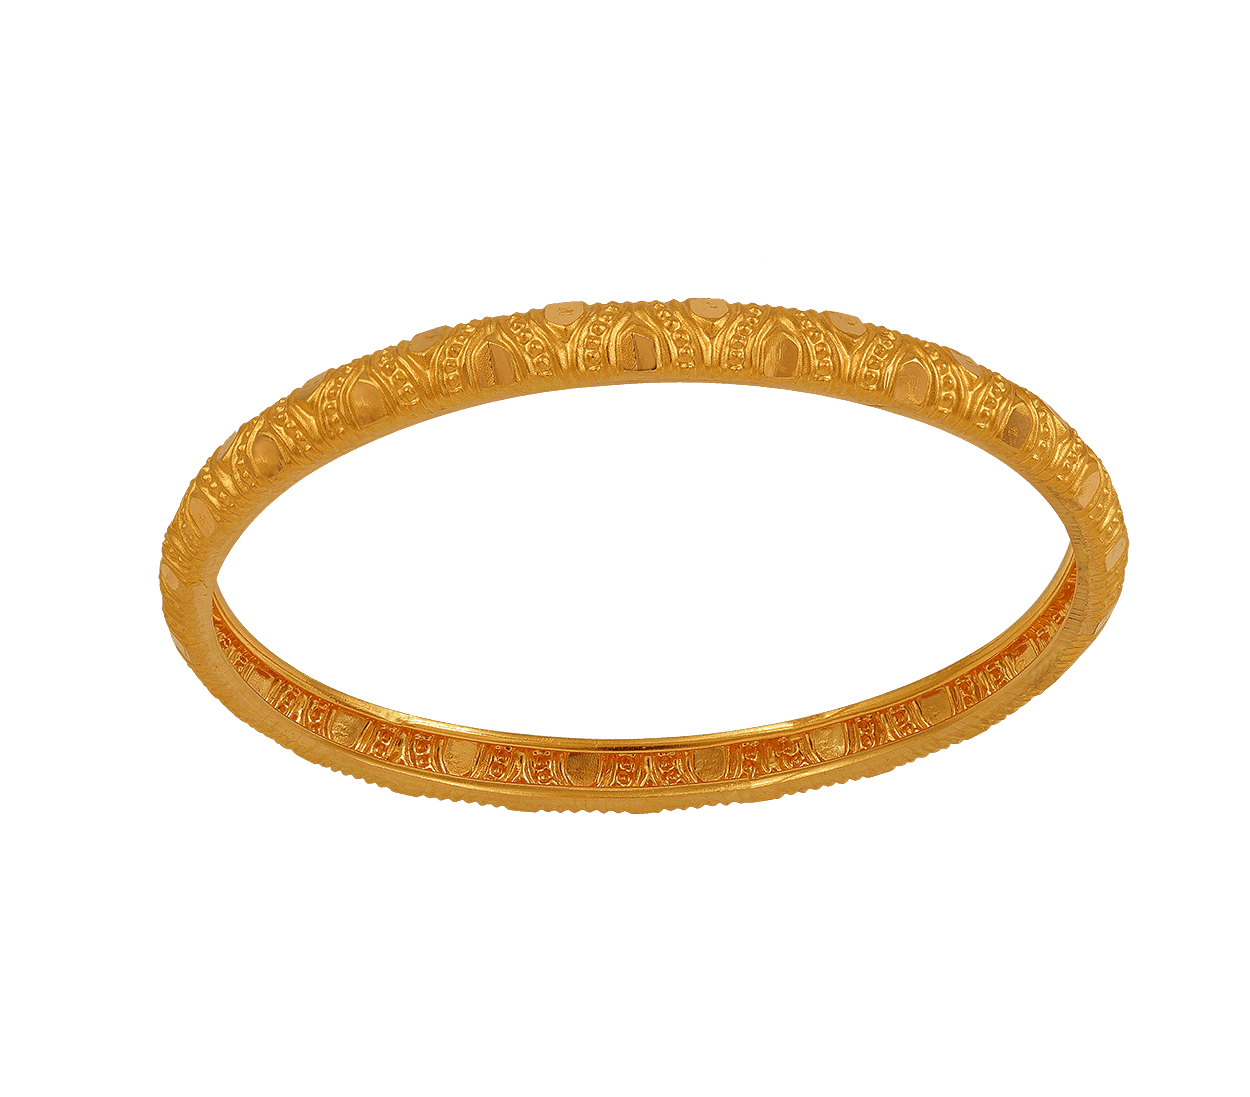 Women Bangle Gold Color Wedding Bangles For Women Bride Can OPen Bracelets  Indian/Ethiopian/France/African/Dubai Jewelry Gifts Y1218 From Yanqin08,  $14.59 | DHgate.Com